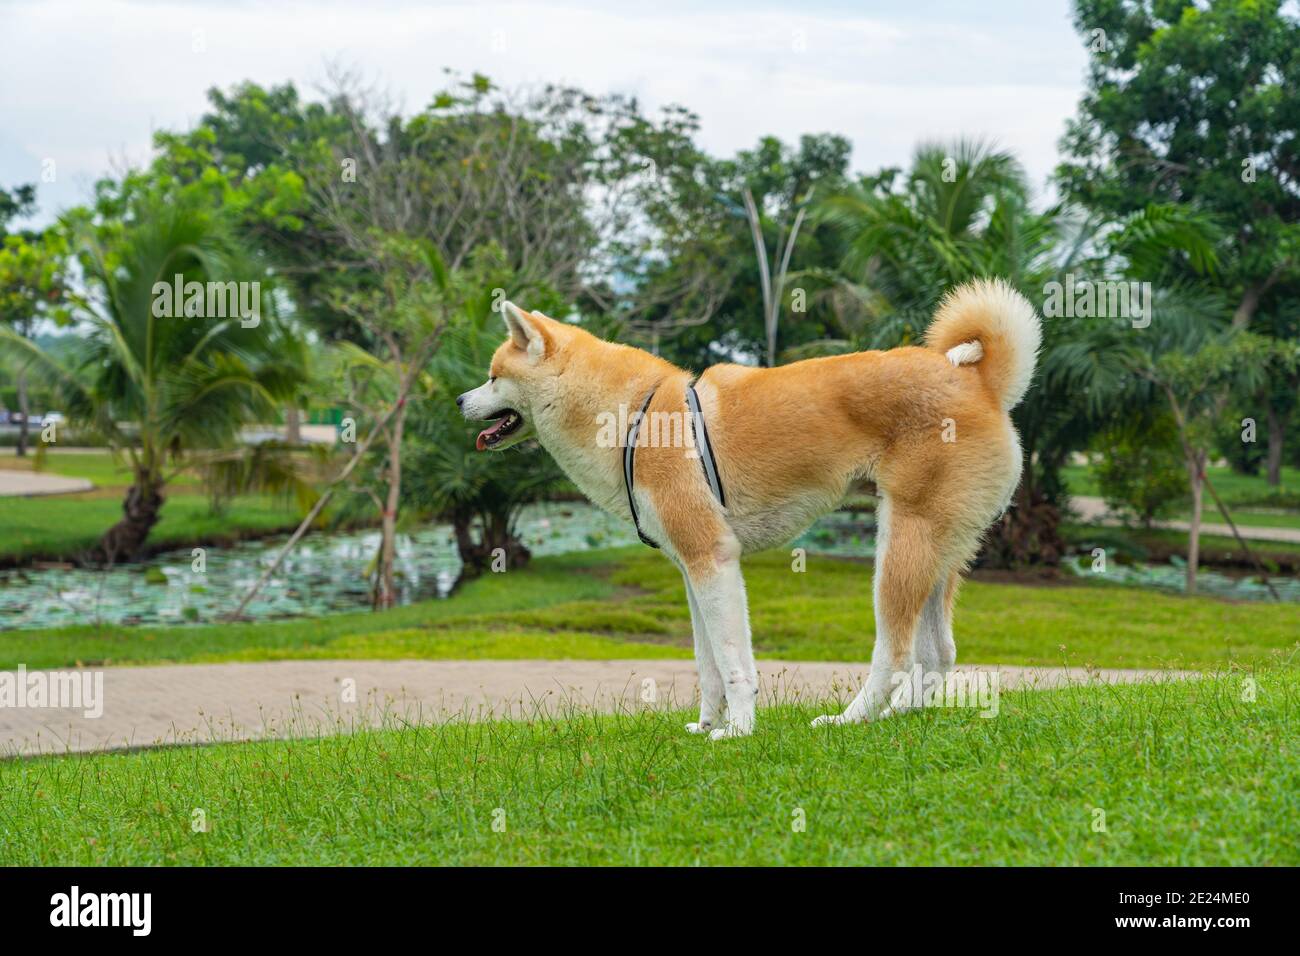 Adorable akita dog smiling in the park Stock Photo